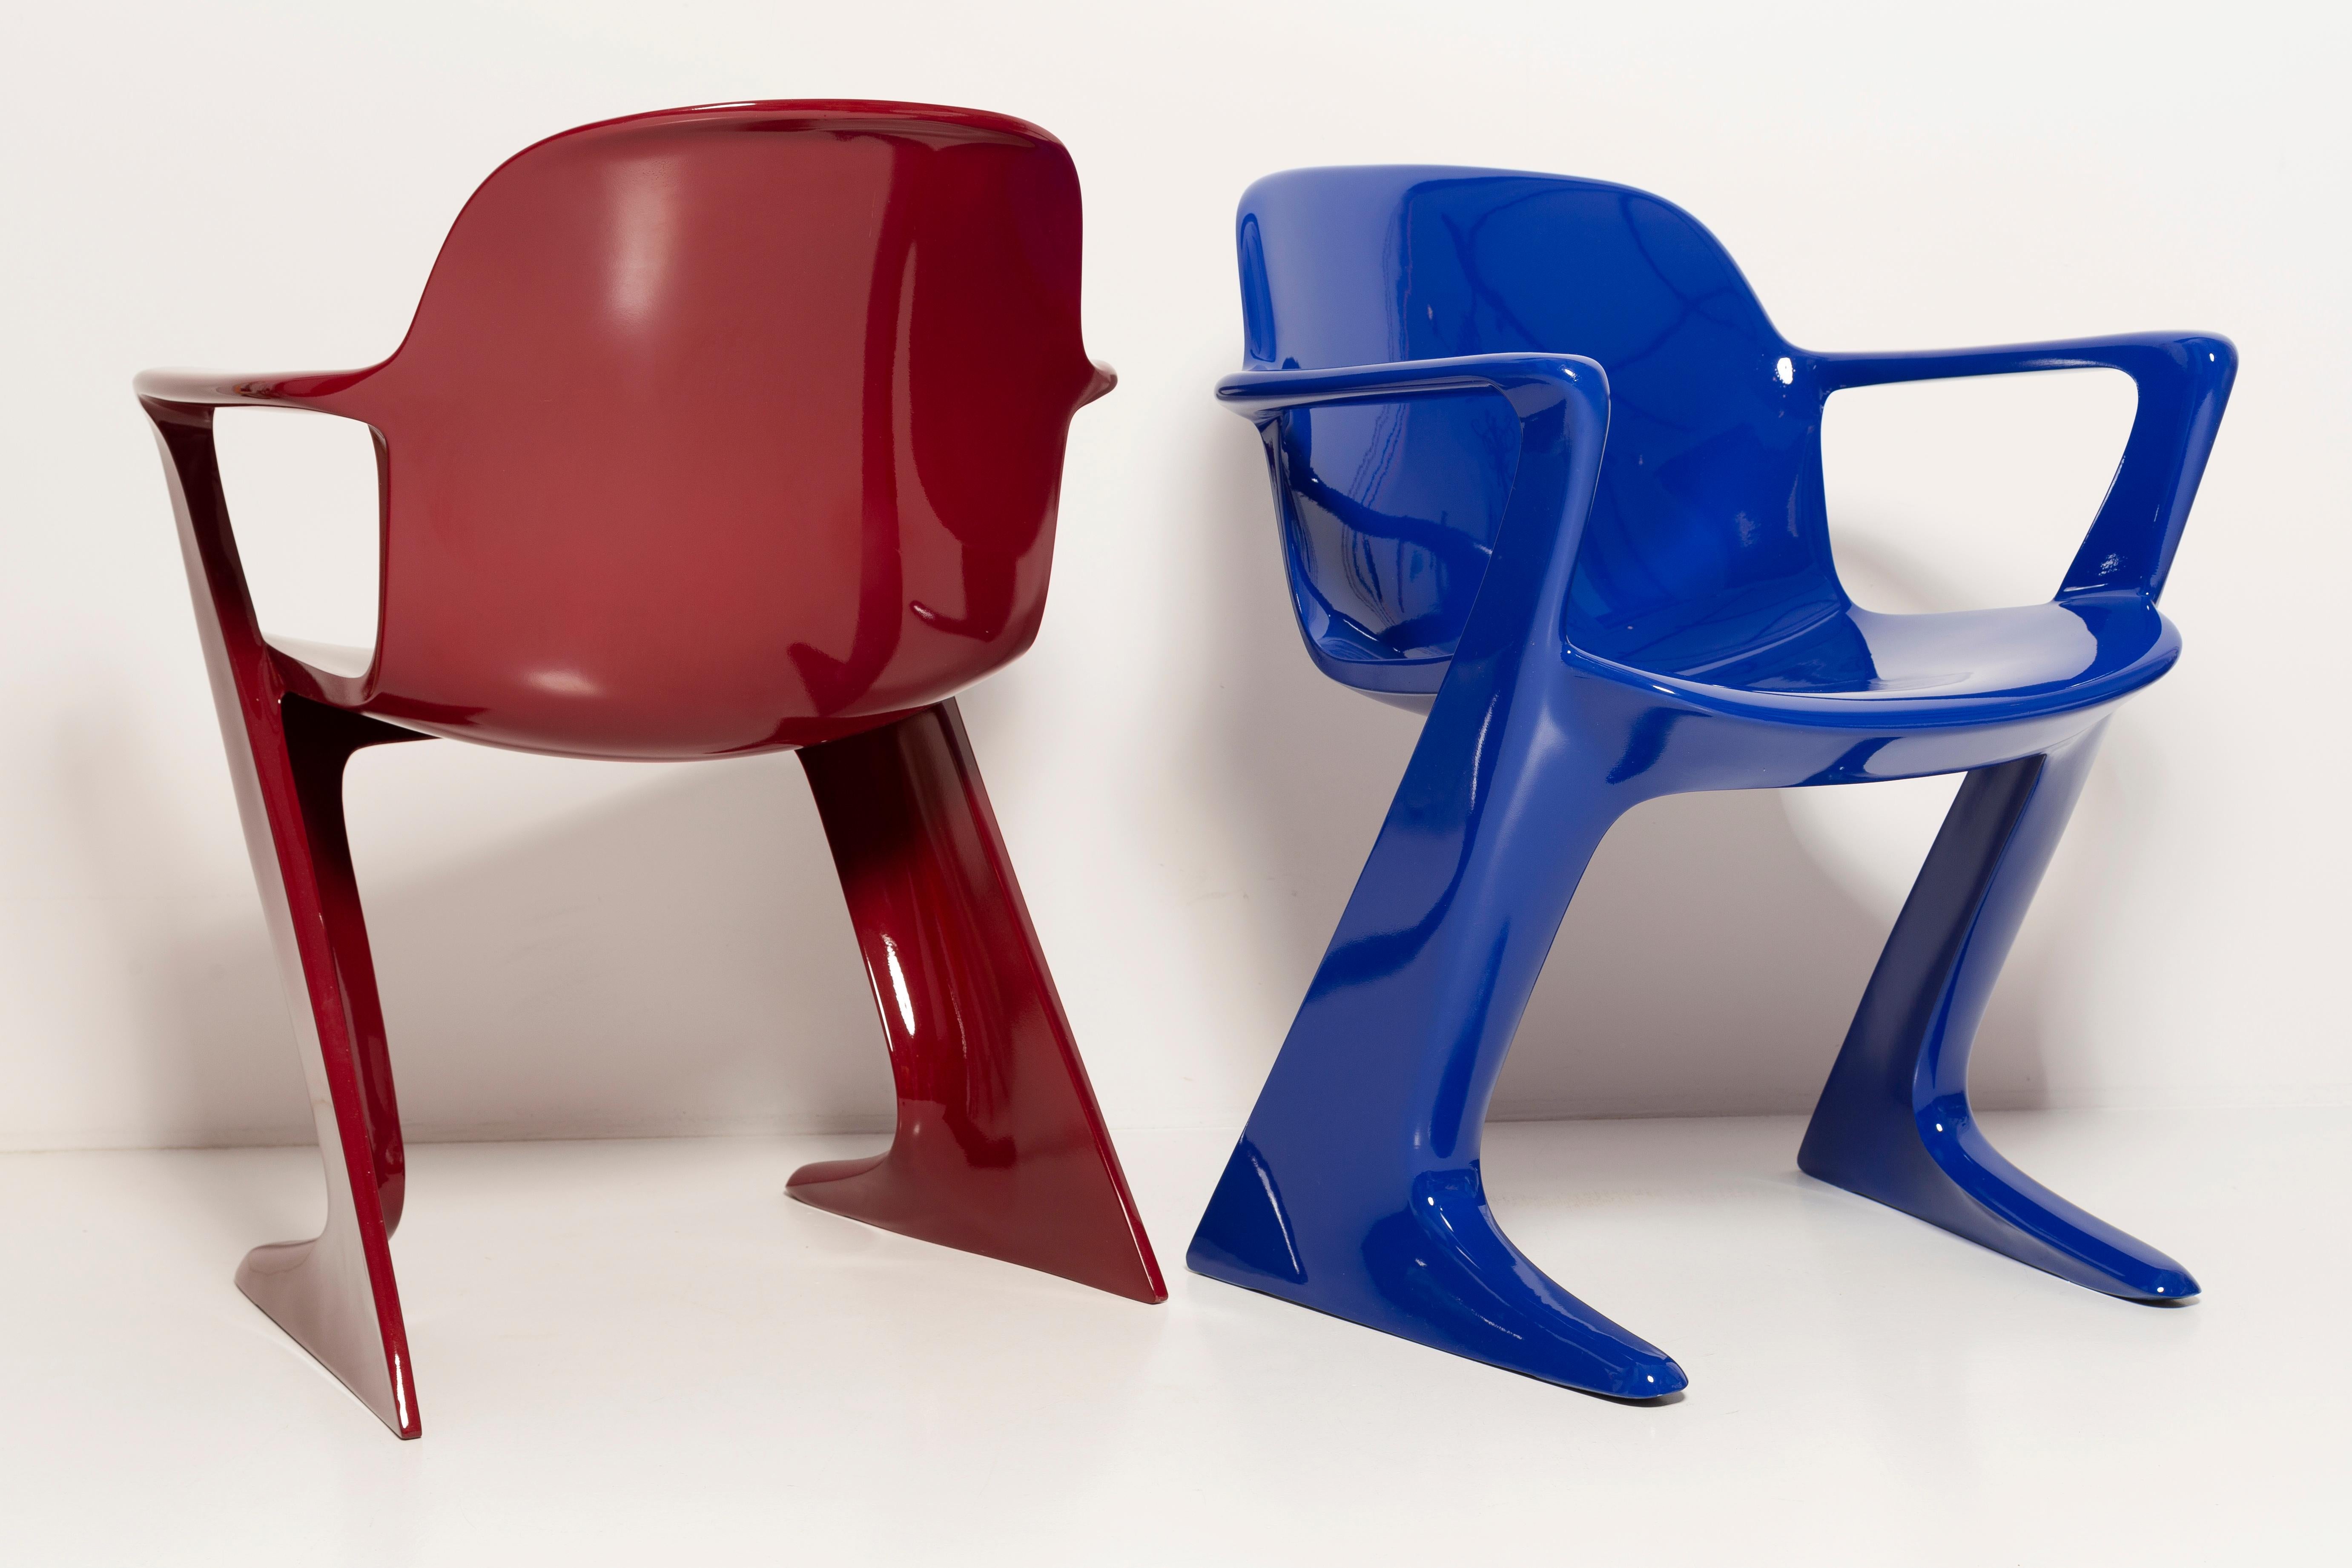 Two Mid-Century Burgundy Red and Blue Kangaroo Chairs Ernst Moeckl Germany, 1968 For Sale 3